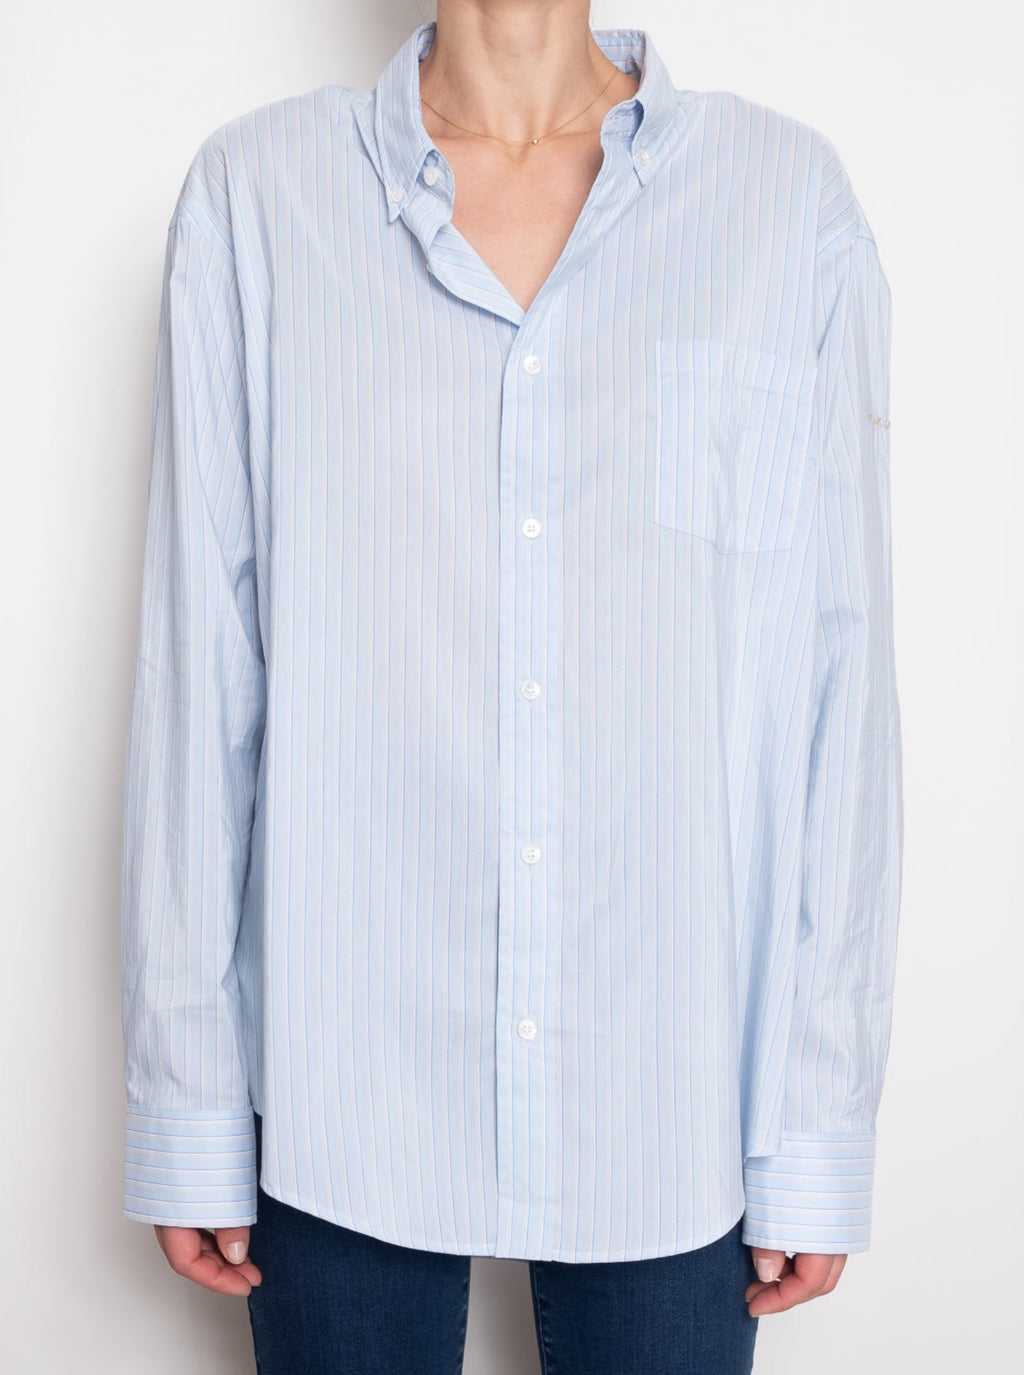 Standard Button Down Shirt / Pacific Blue and Mustard Stripe